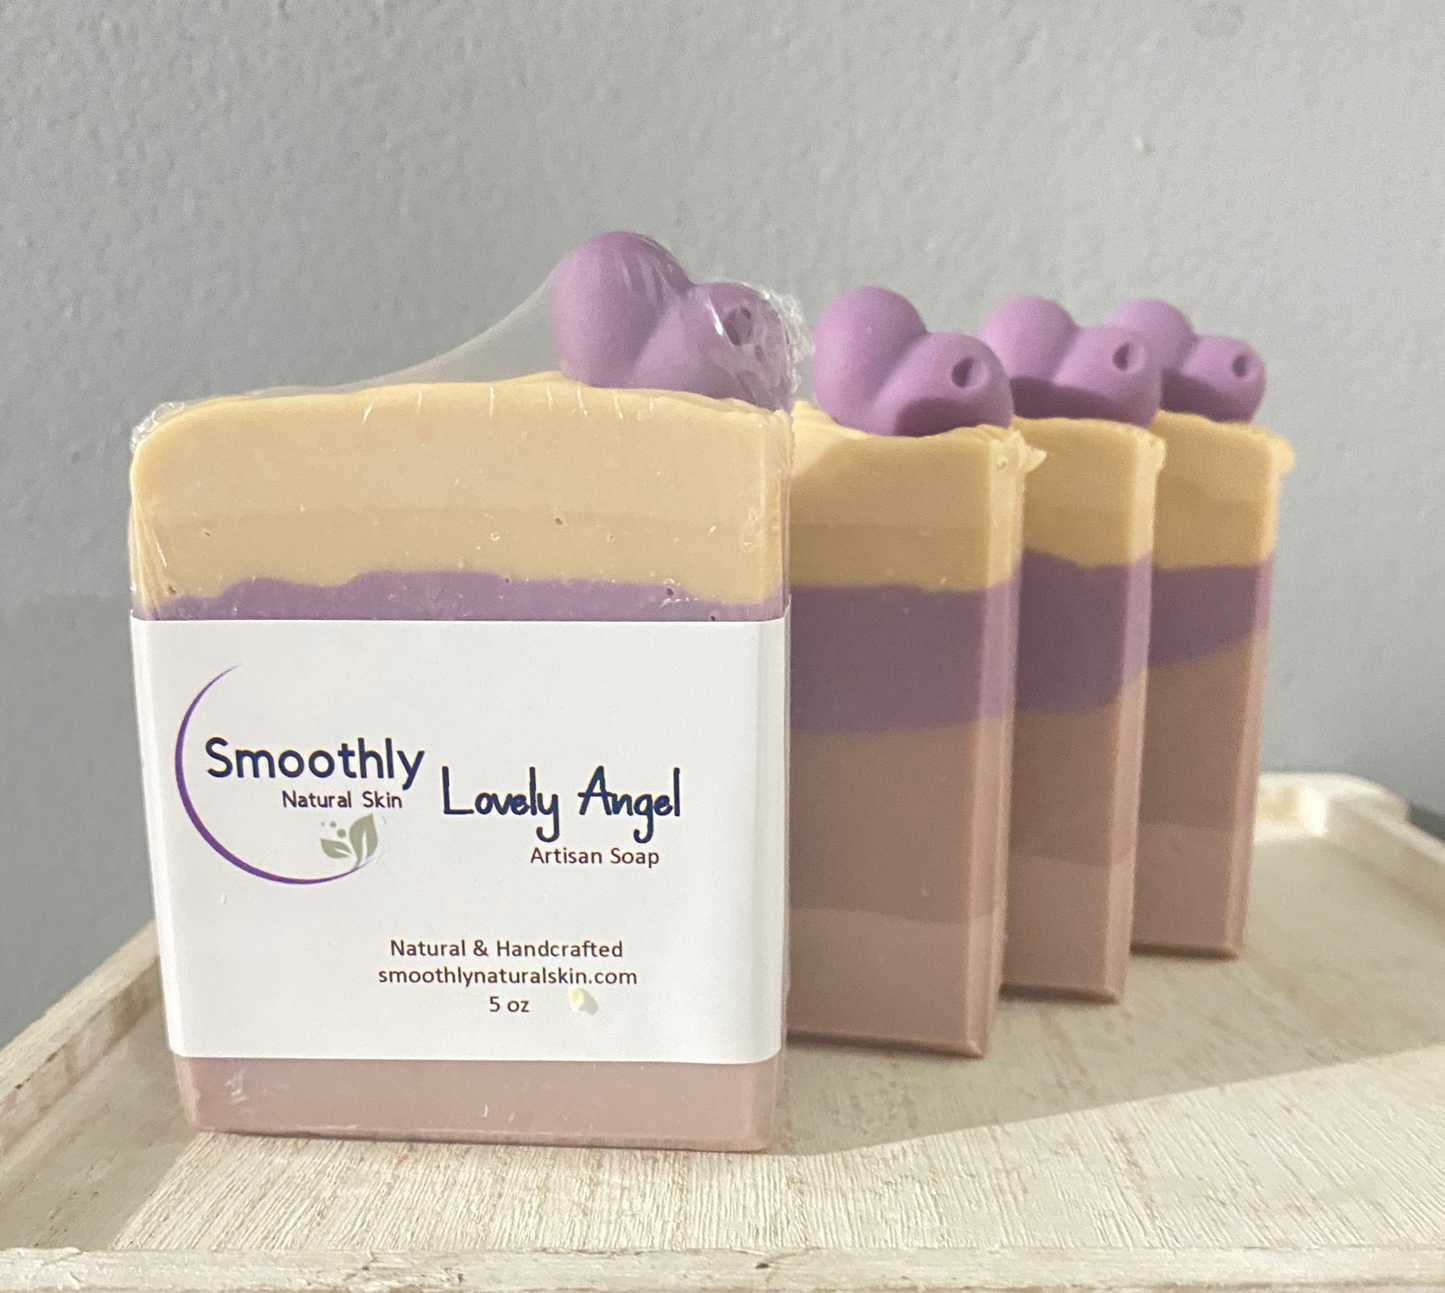 Lovely Angel Soap is a very feminine fragrance with top notes of lemon, raspberry, honeydew melon; middle notes of jasmine, gardenia, and nutmeg and bottom notes of white chocolate, musk, sandalwood, and patchouli. Very complex! Do you like the perfume named Angel? This soap comes close to smelling like it. Smoothly Natural Skin